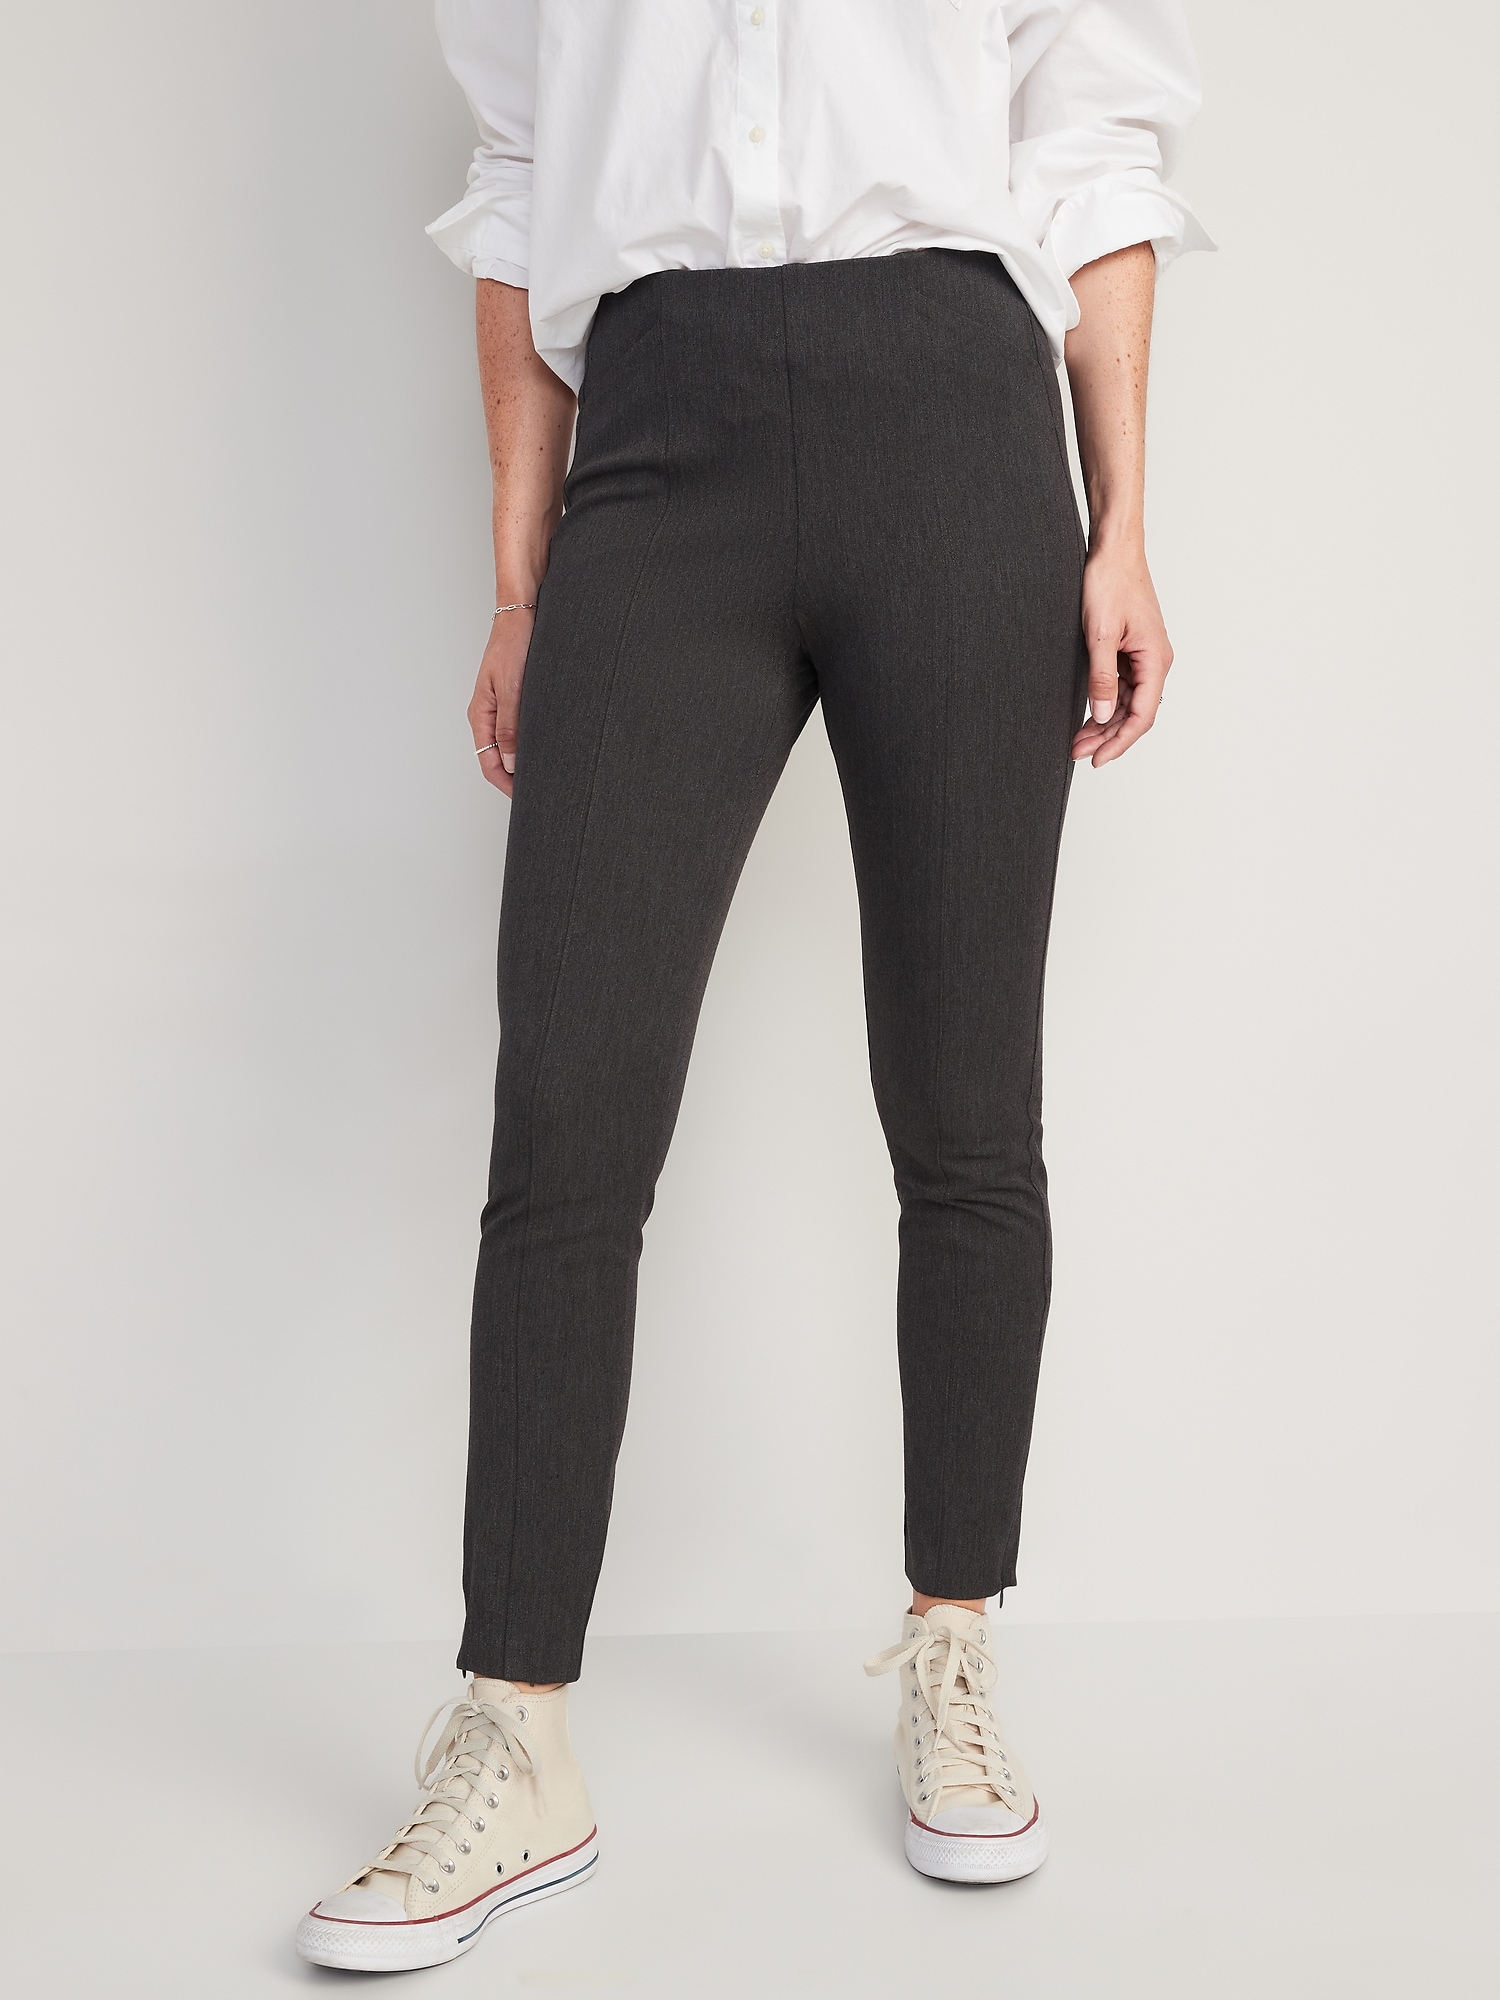 High-Waisted Zipped Pull-On Pixie Skinny Ankle Pants for Women | Old Navy